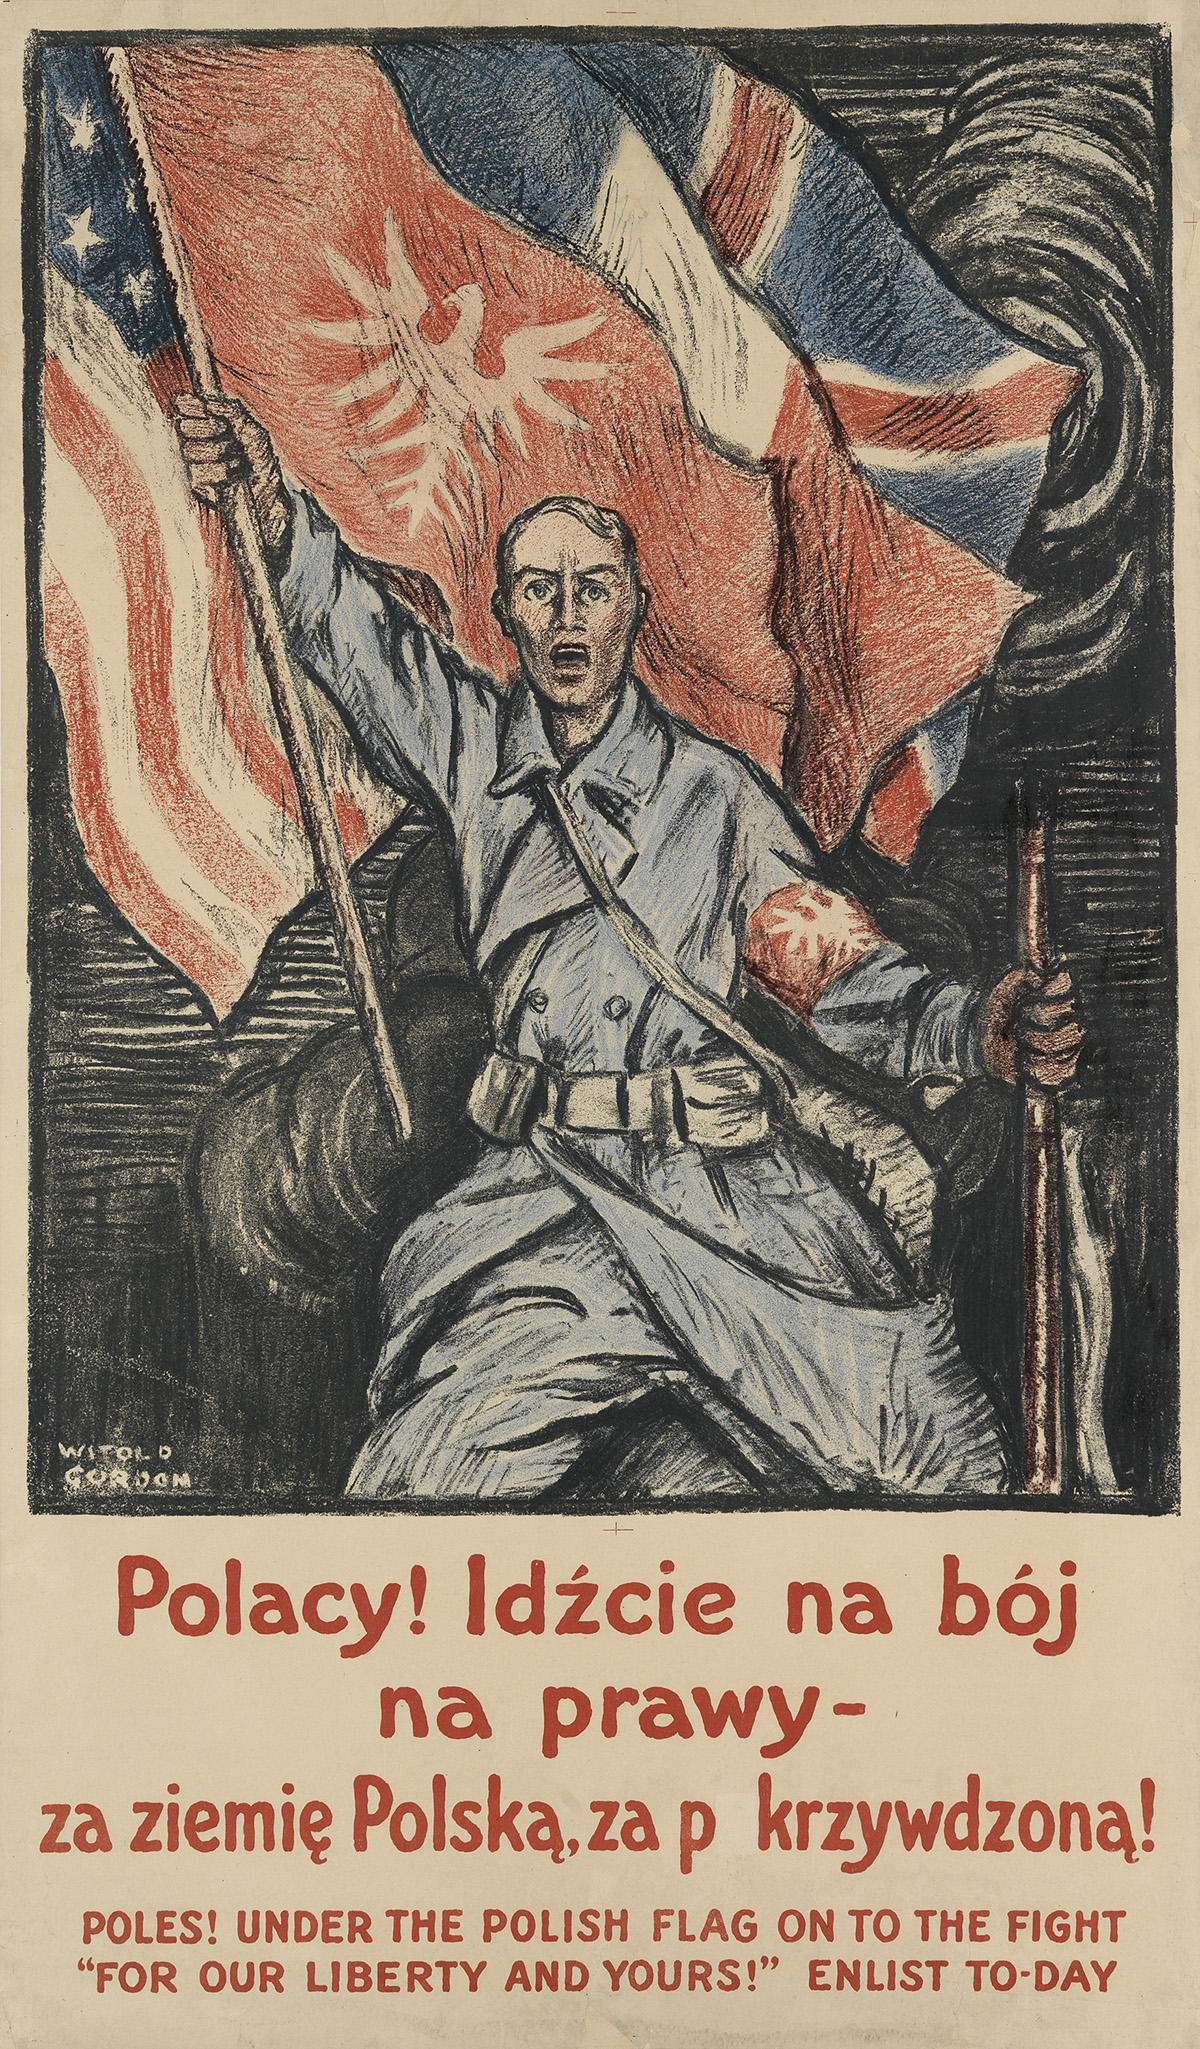 WITOLD GORDON (1885-1968). POLES! UNDER THE POLISH FLAG ON TO THE FIGHT / FOR OUR LIBERTY AND YOURS! Circa 1916. 38x22 inches, 96x57